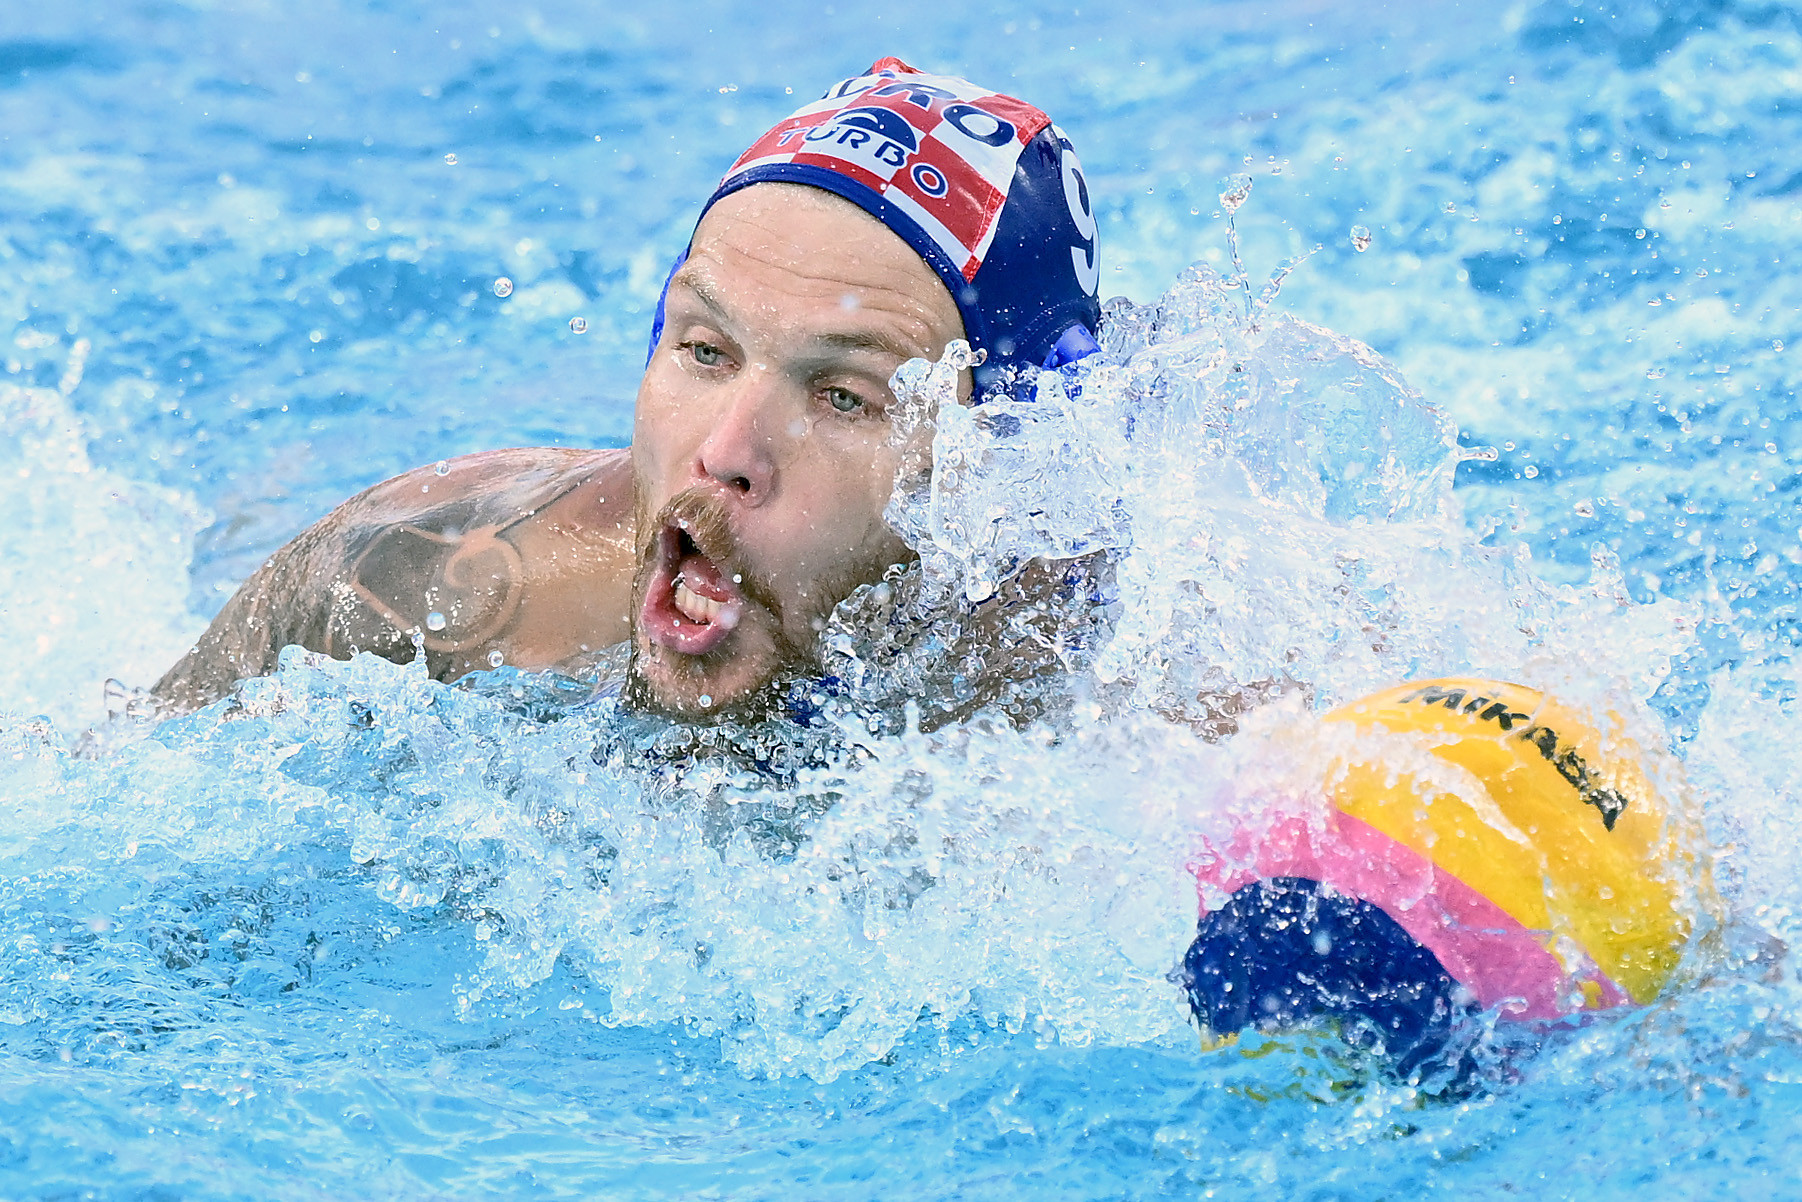 Hosts Croatia among qualifiers to quarter-finals at Men’s European Water Polo Championship